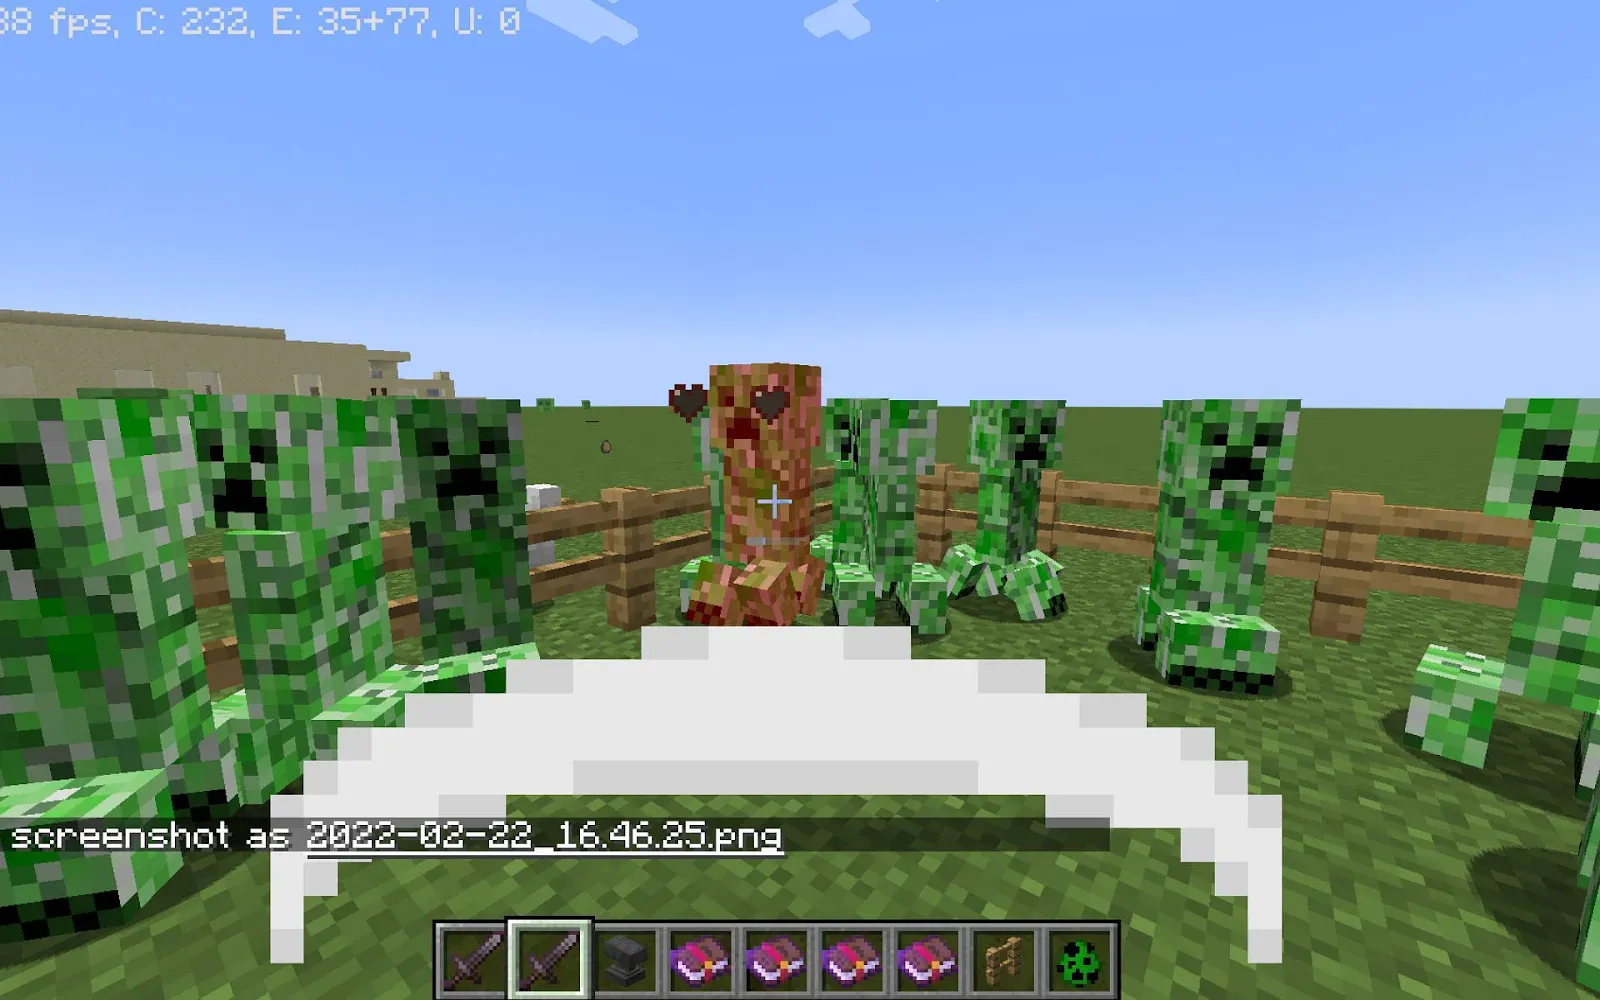 An image of a group of creepers being hit with a sword using knockback.